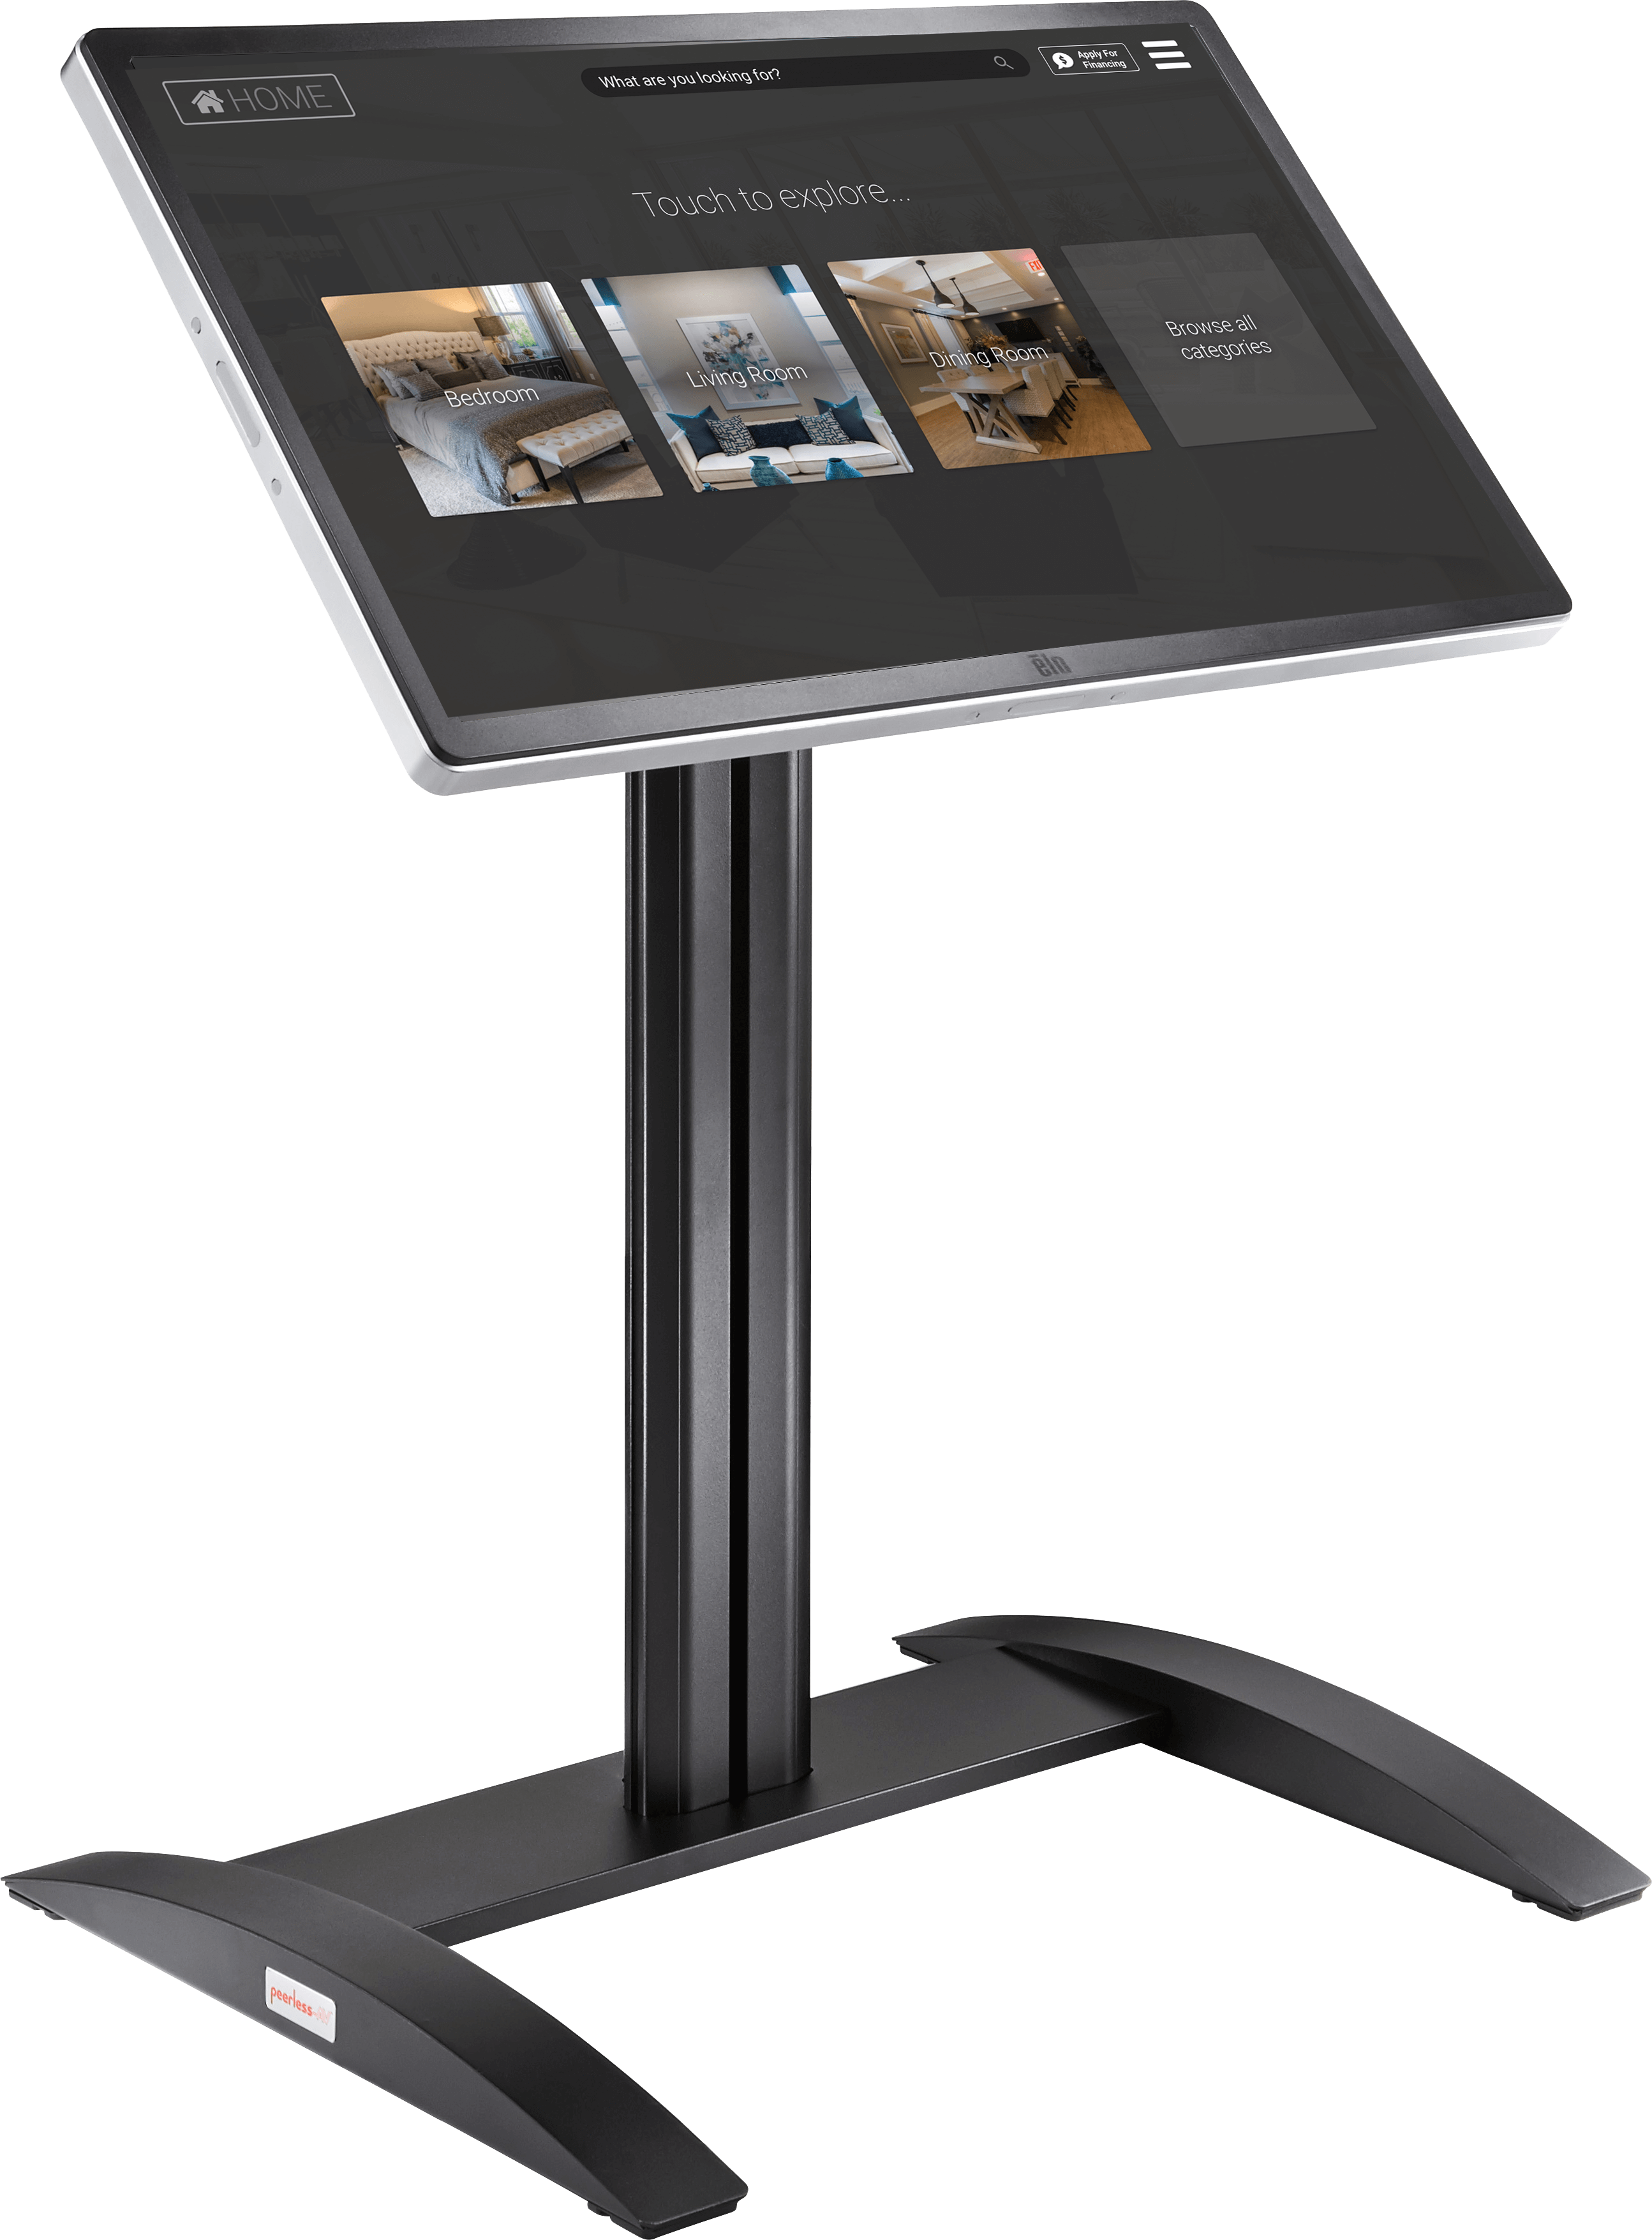 42" kiosk with attractor screen showing top categories